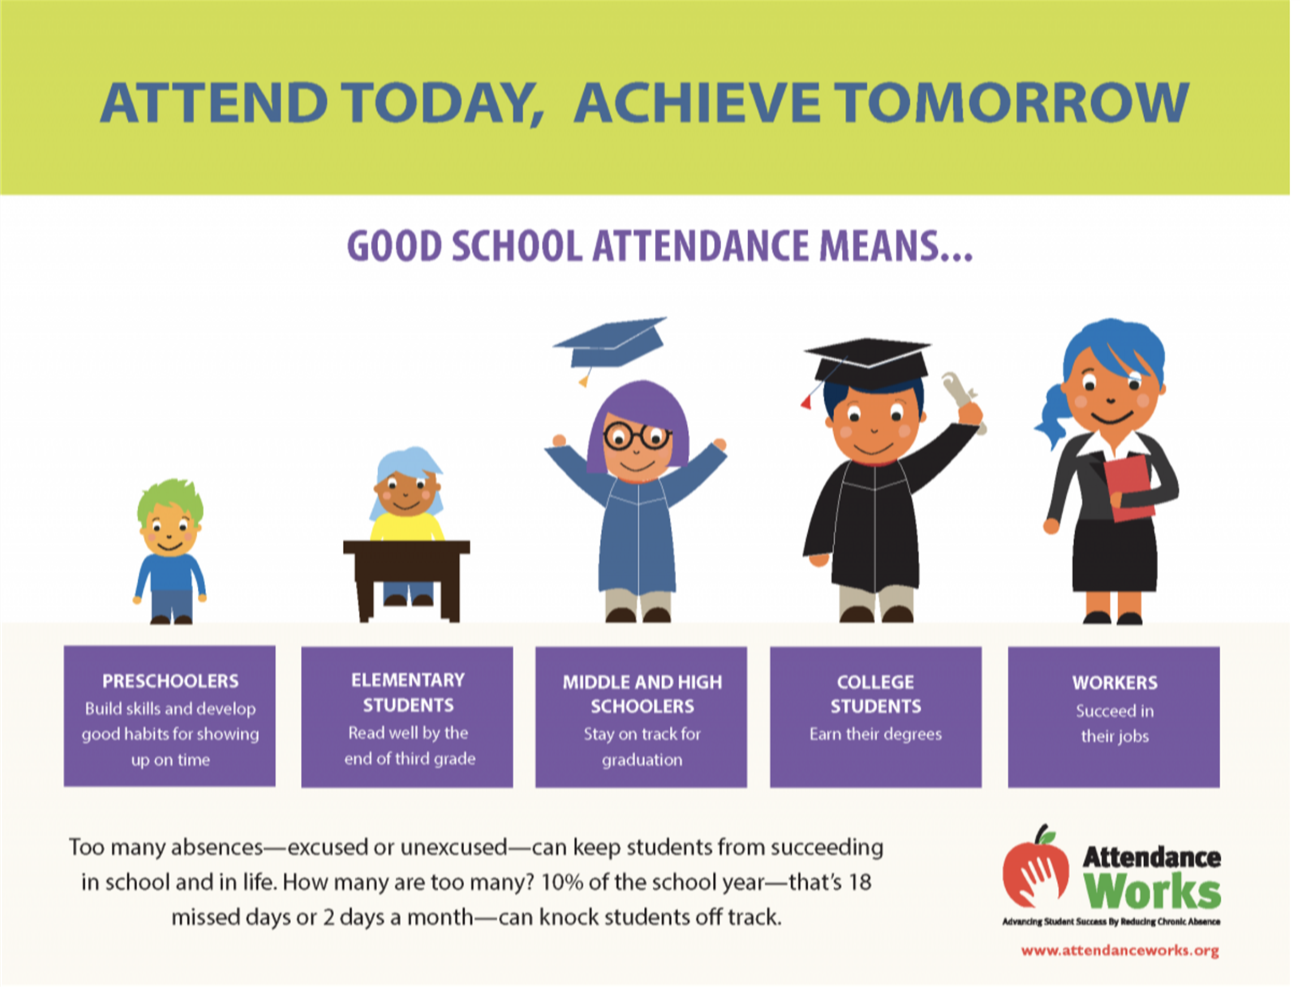 ATTEND TODAY, ACHIEVE TOMORROW GOOD SCHOOL ATTENDANCE MEANS... PRESCHOOLERS Build skills and develop good habits for showing up on time ELEMENTARY STUDENTS Read well by the end of third grade MIDDLE AND HIGH SCHOOLERS Stay on track for graduation COLLEGE STUDENTS Earn their degrees WORKERS Succeed in their jobs Too many absences-excused or unexcused-can keep students from succeeding in school and in life. How many are too many? 10% of the school year--that's 18 missed days or 2 days a month-can knock students off track. Attendance Works Advanding Student Success By Reduding Chronk Absence www.attendanceworks.org